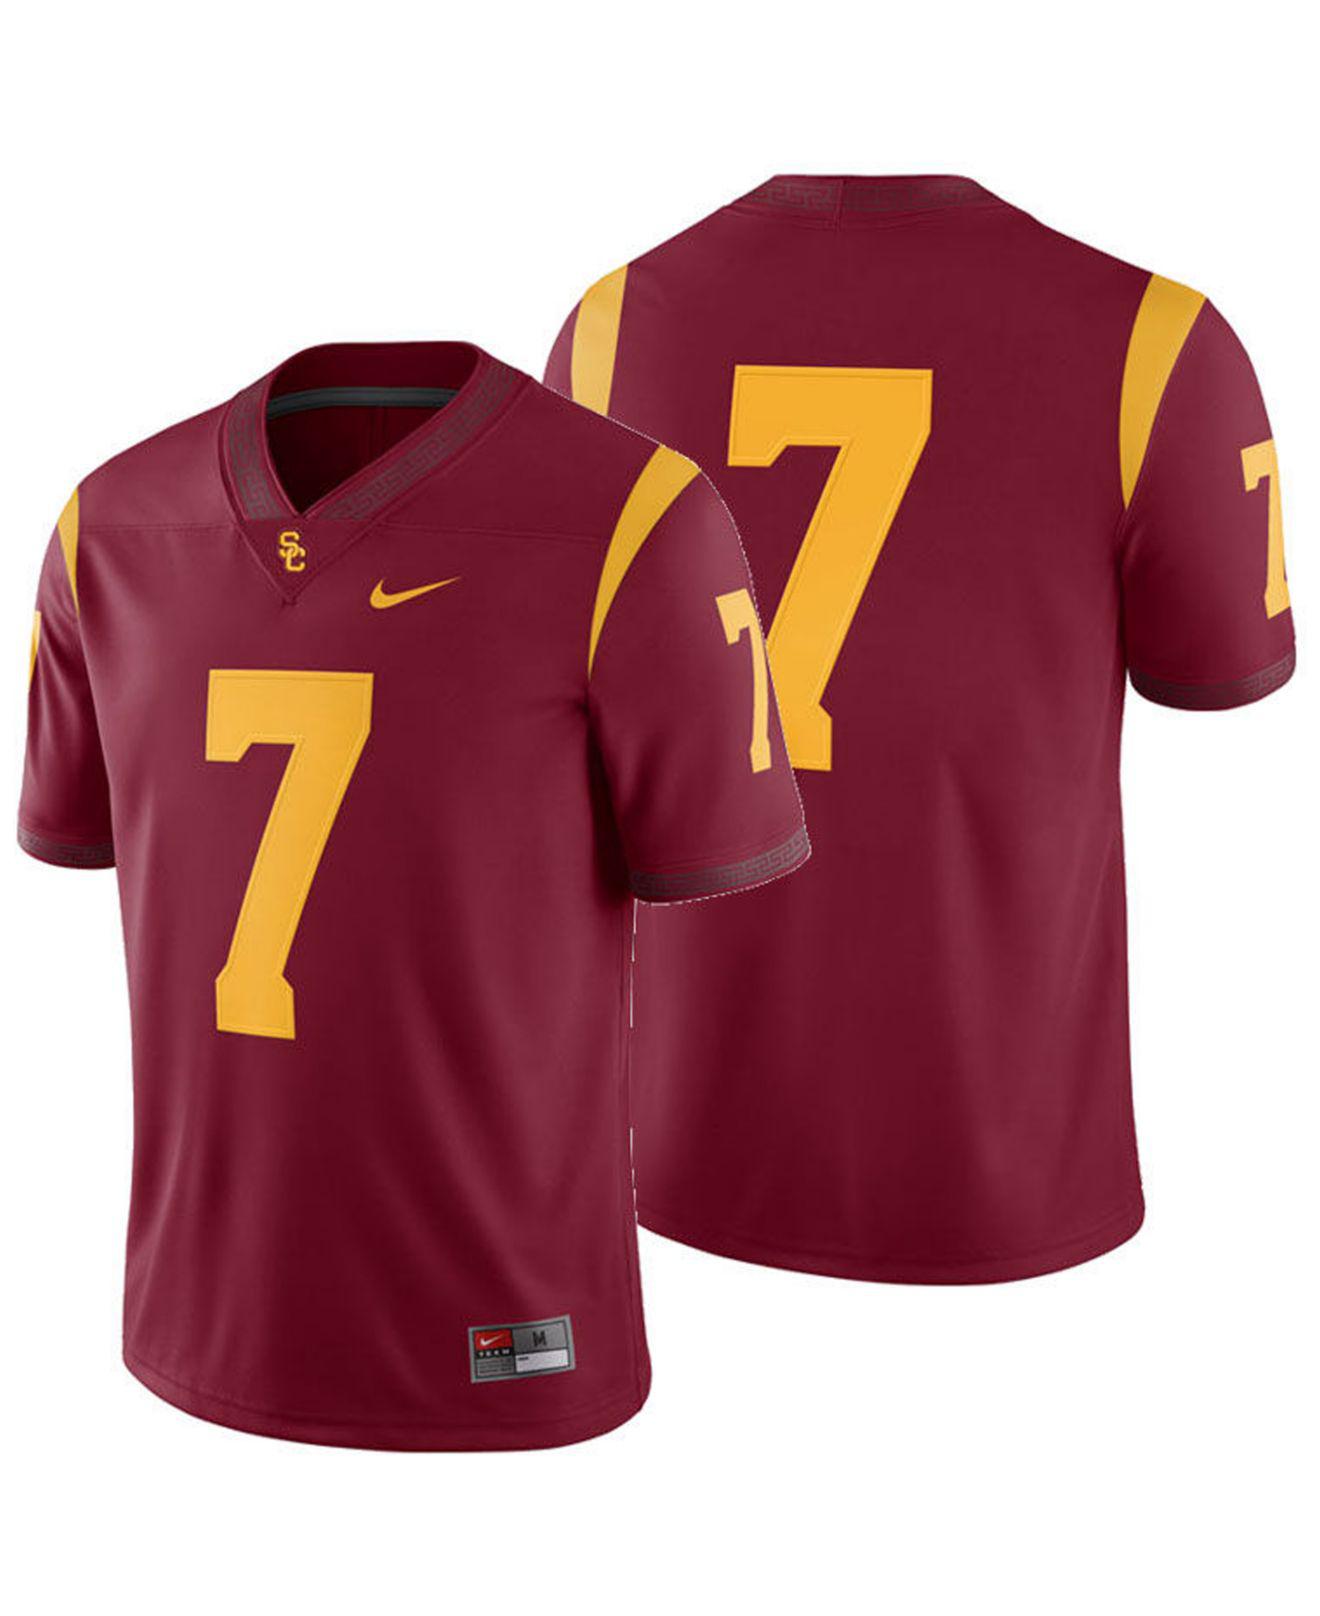 Lyst - Nike Usc Trojans Football Replica Game Jersey in Red for Men